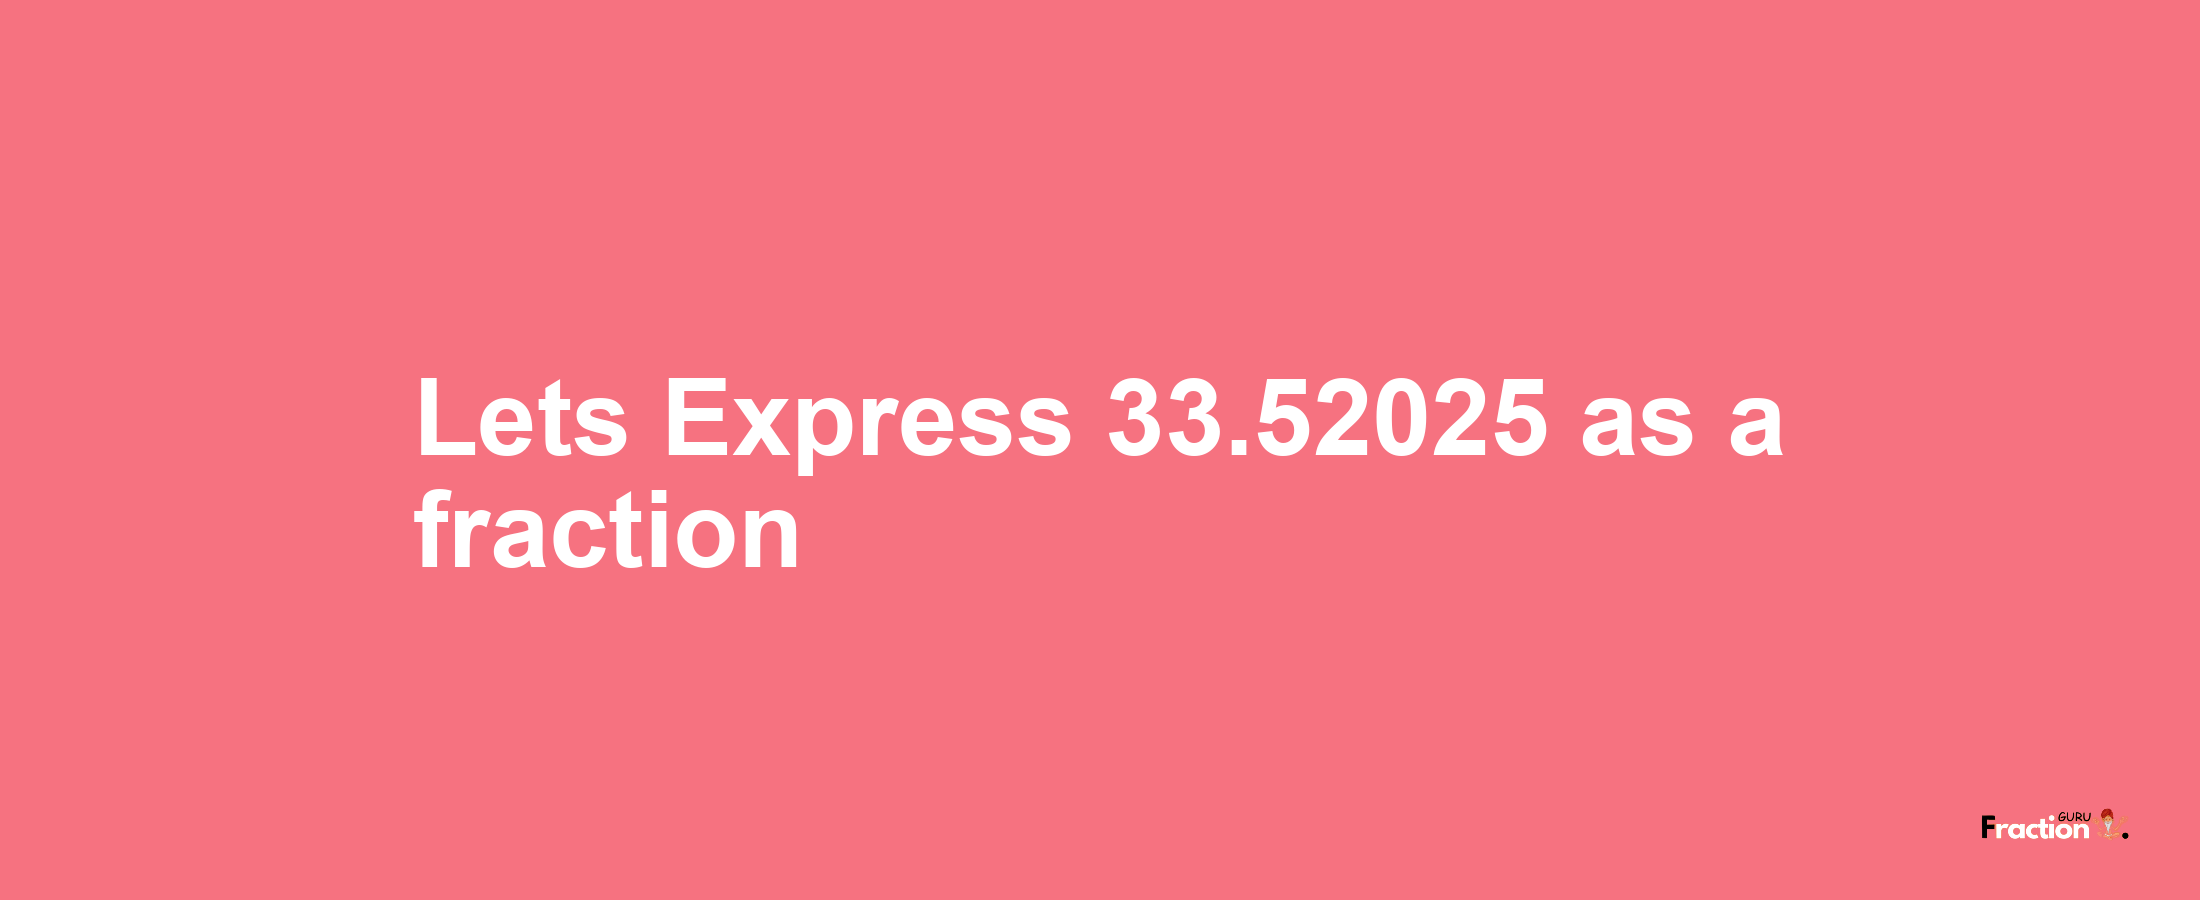 Lets Express 33.52025 as afraction